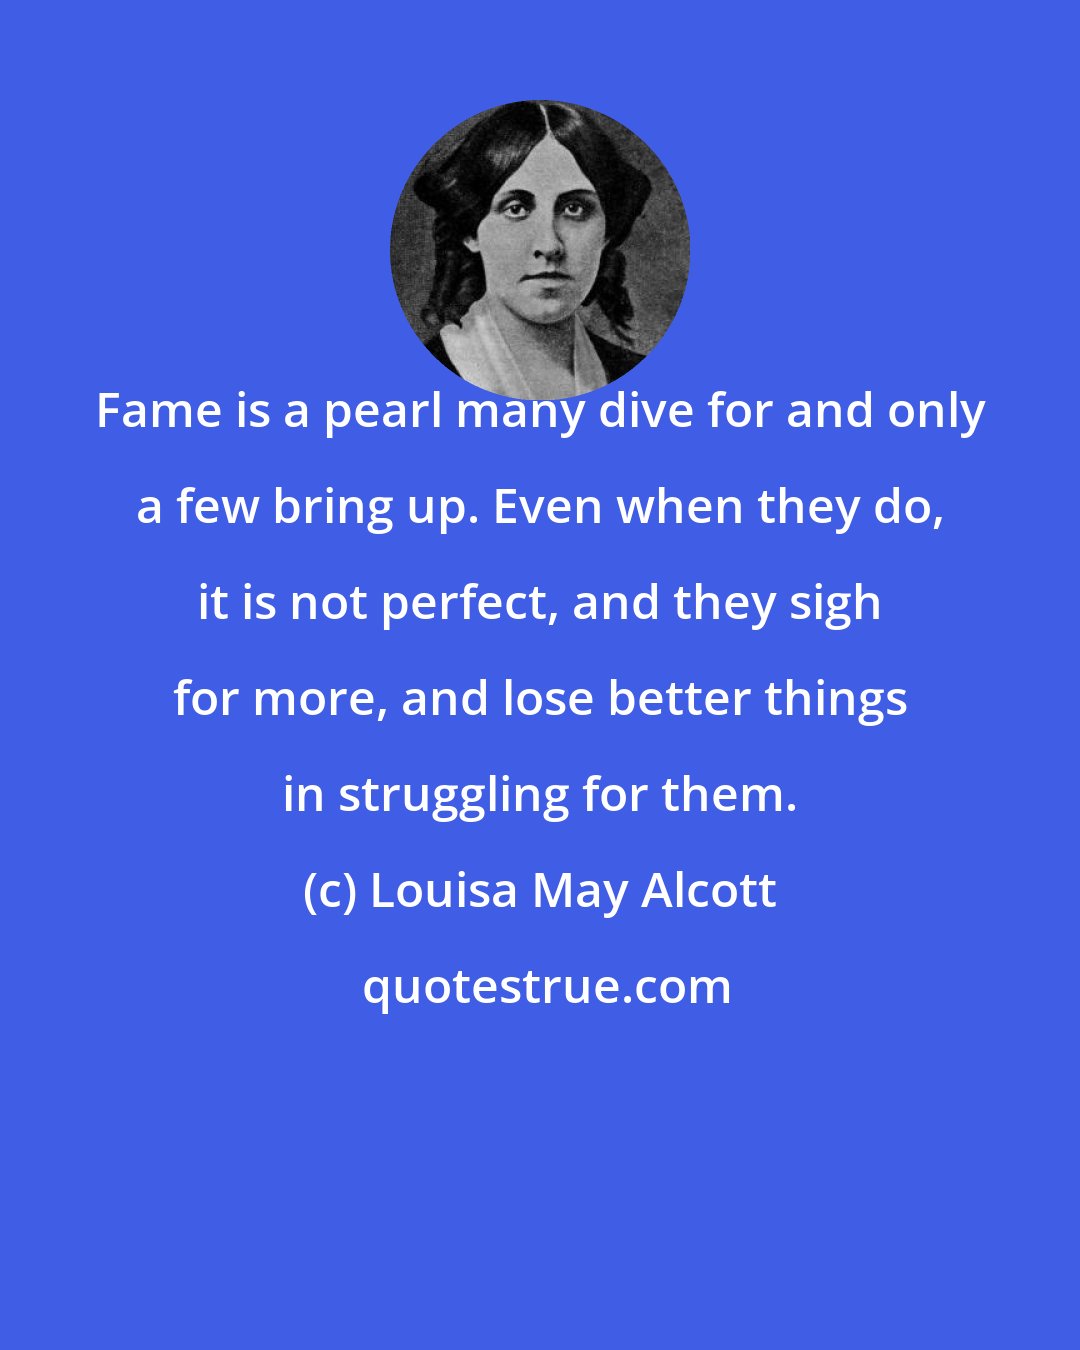 Louisa May Alcott: Fame is a pearl many dive for and only a few bring up. Even when they do, it is not perfect, and they sigh for more, and lose better things in struggling for them.